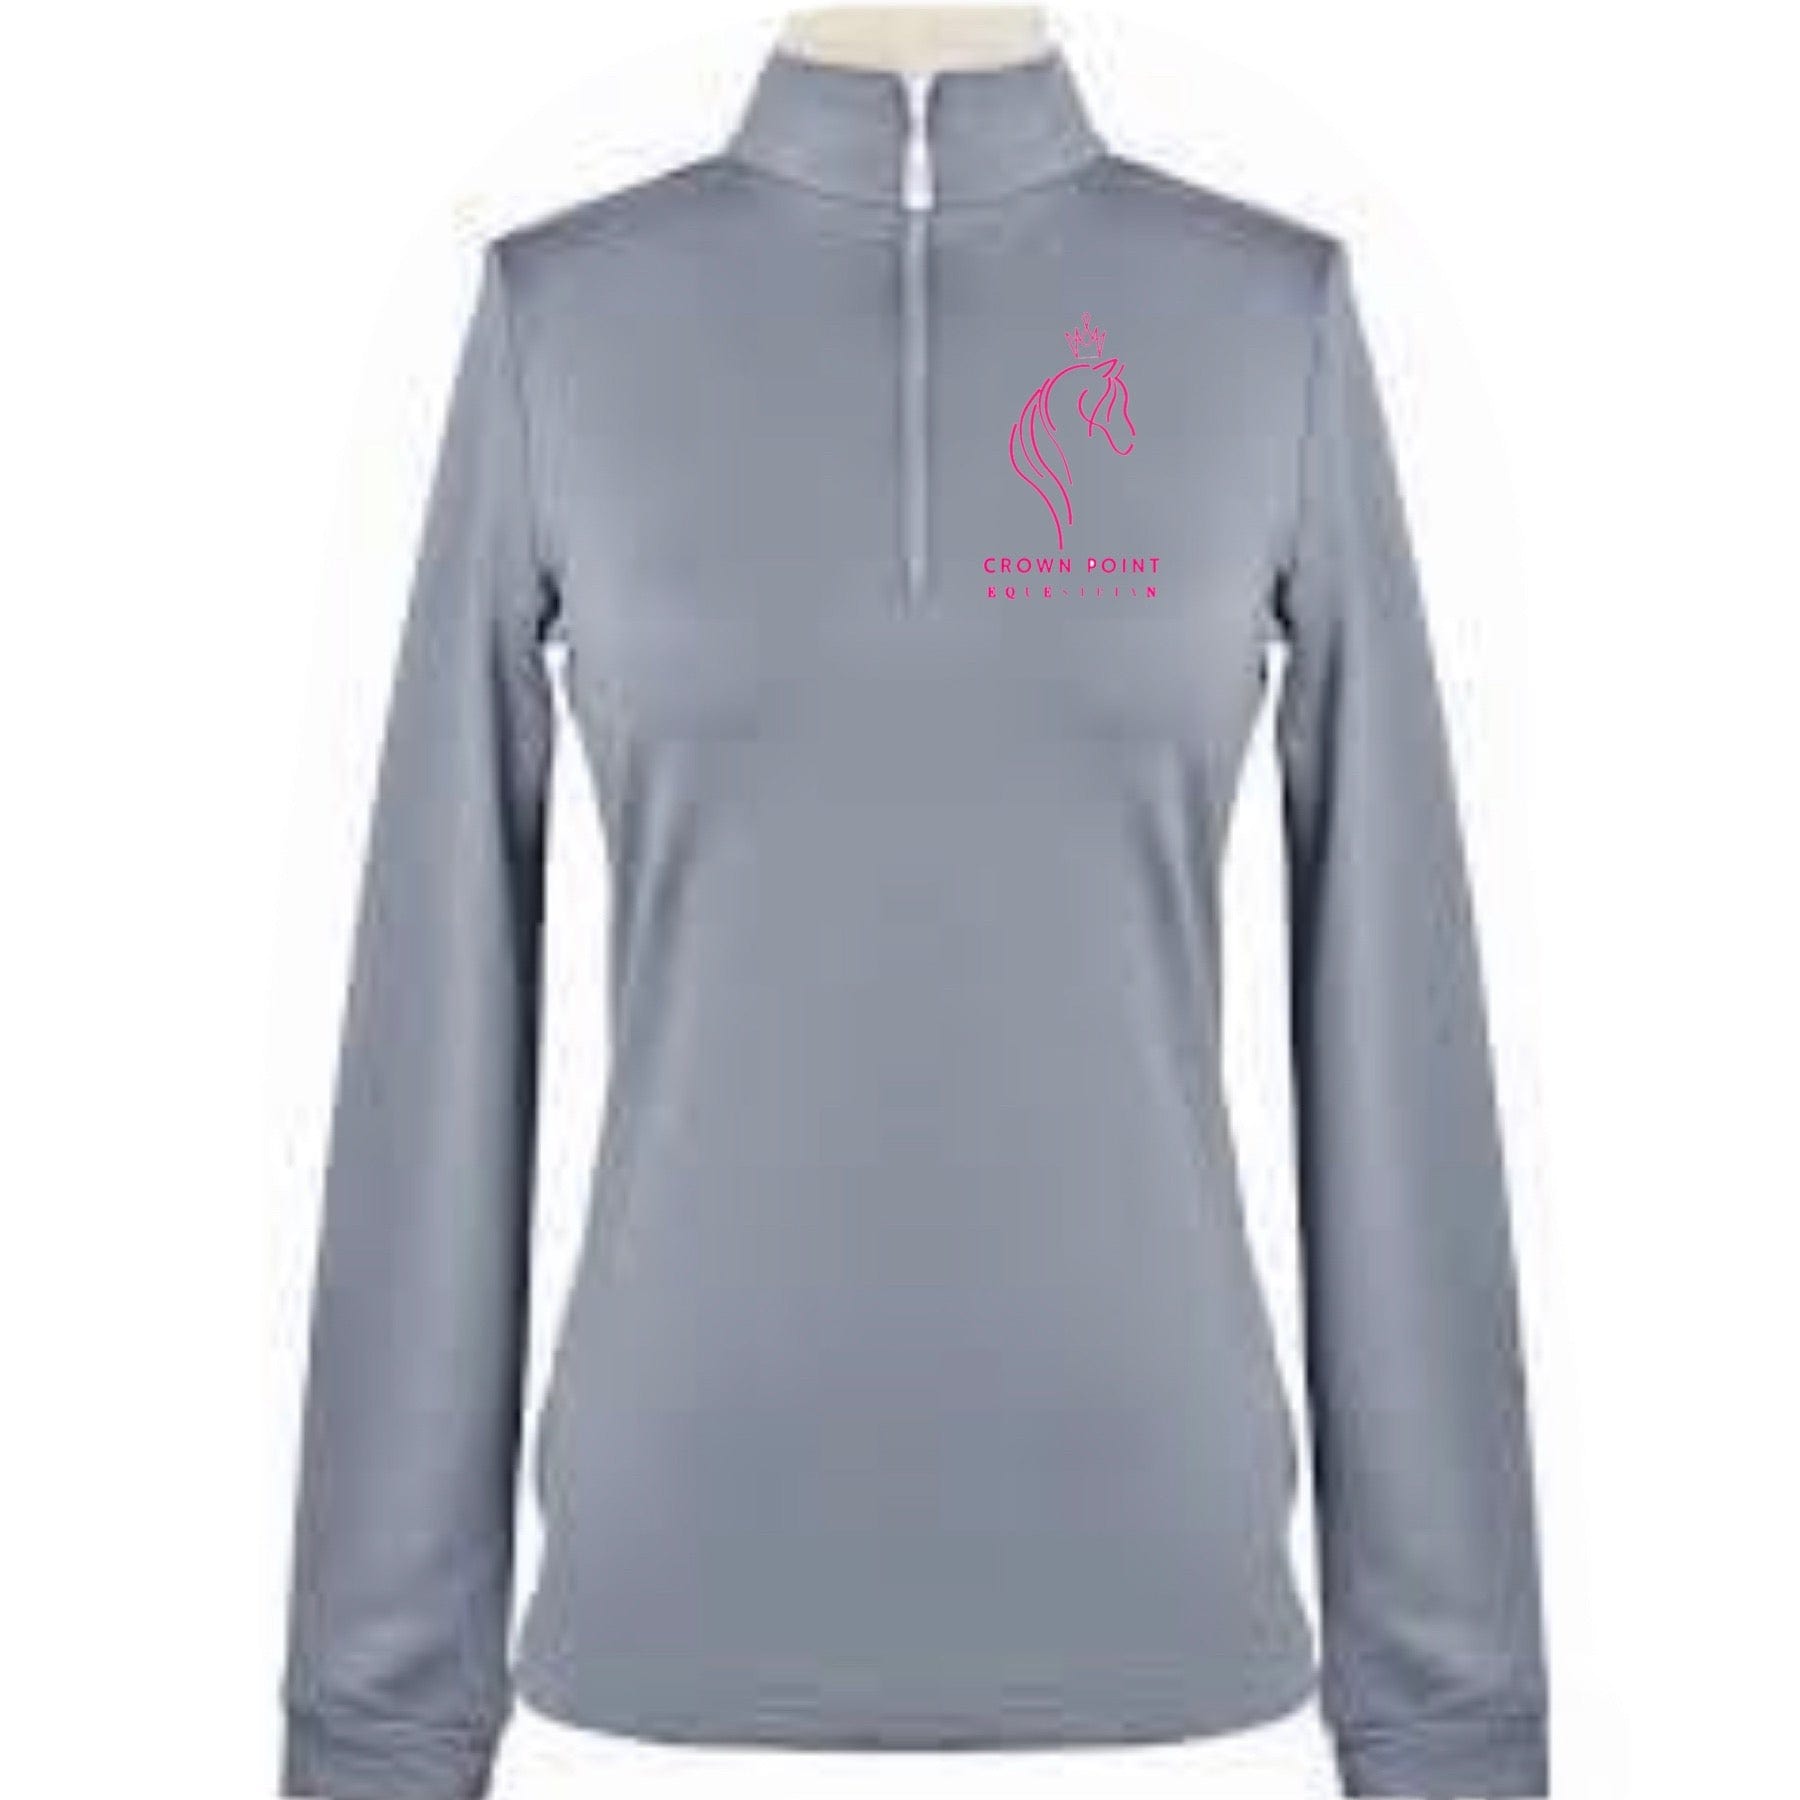 Equestrian Team Apparel Crown Point Equestrian Sun Shirt equestrian team apparel online tack store mobile tack store custom farm apparel custom show stable clothing equestrian lifestyle horse show clothing riding clothes horses equestrian tack store